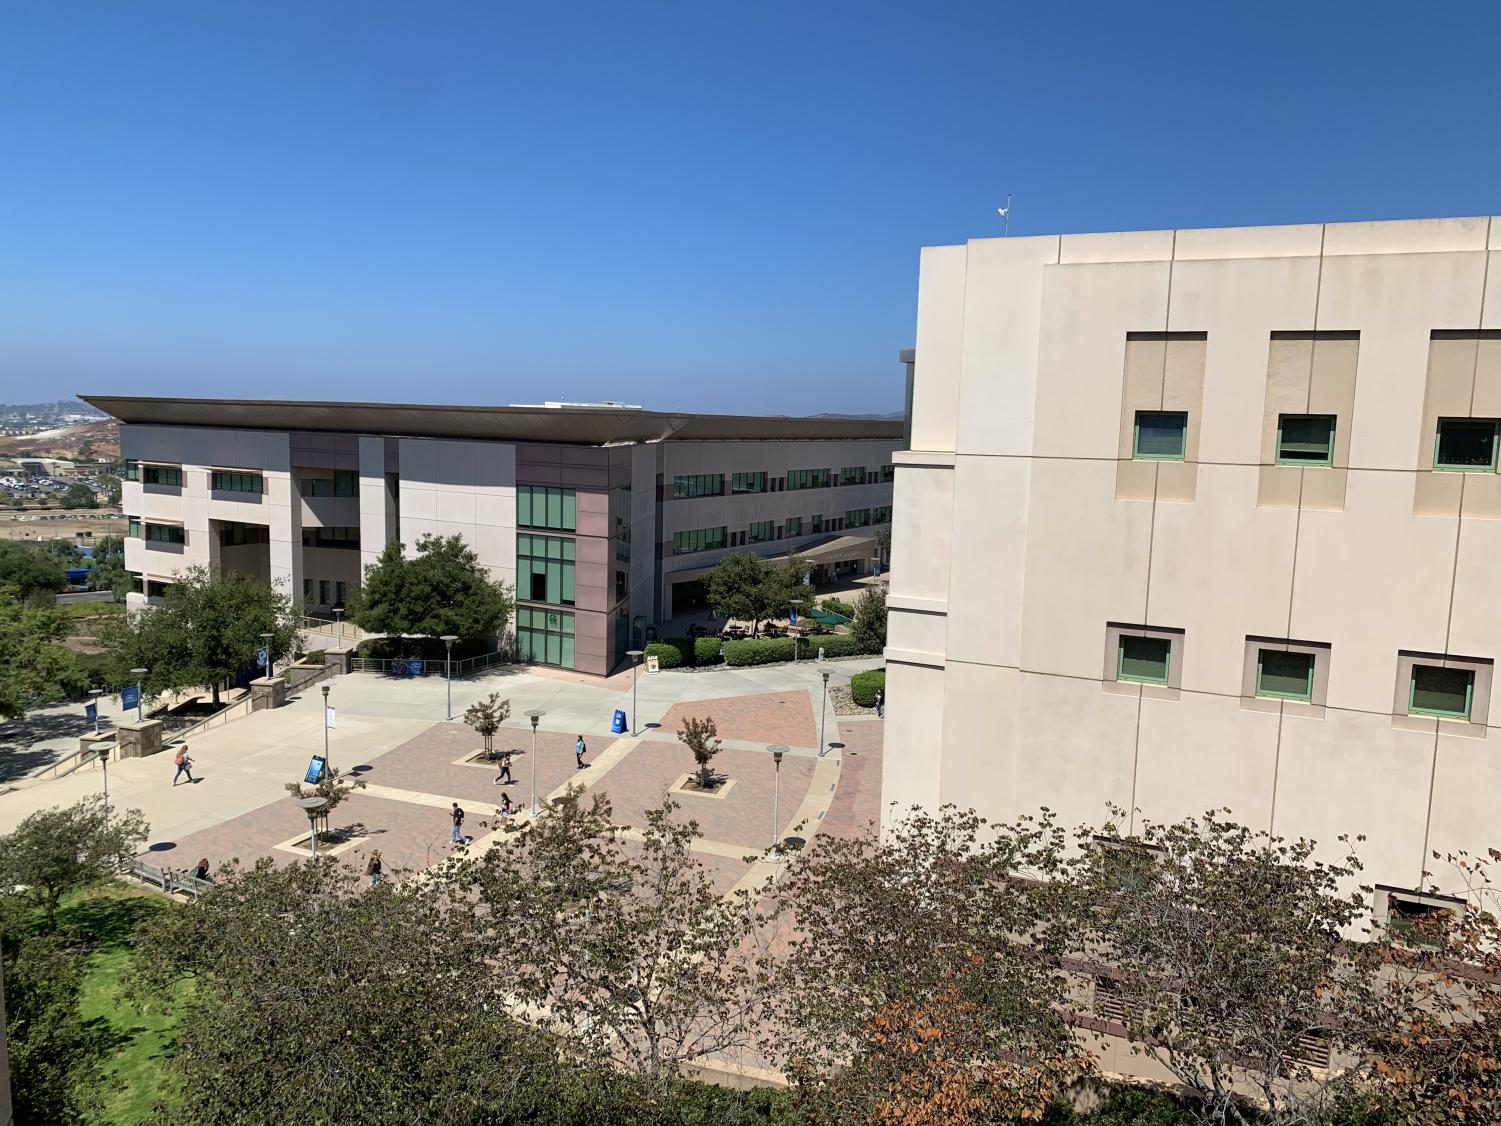 Csusm Calendar 2022 Spring 2022 Course Schedule Now Available - The Cougar Chronicle